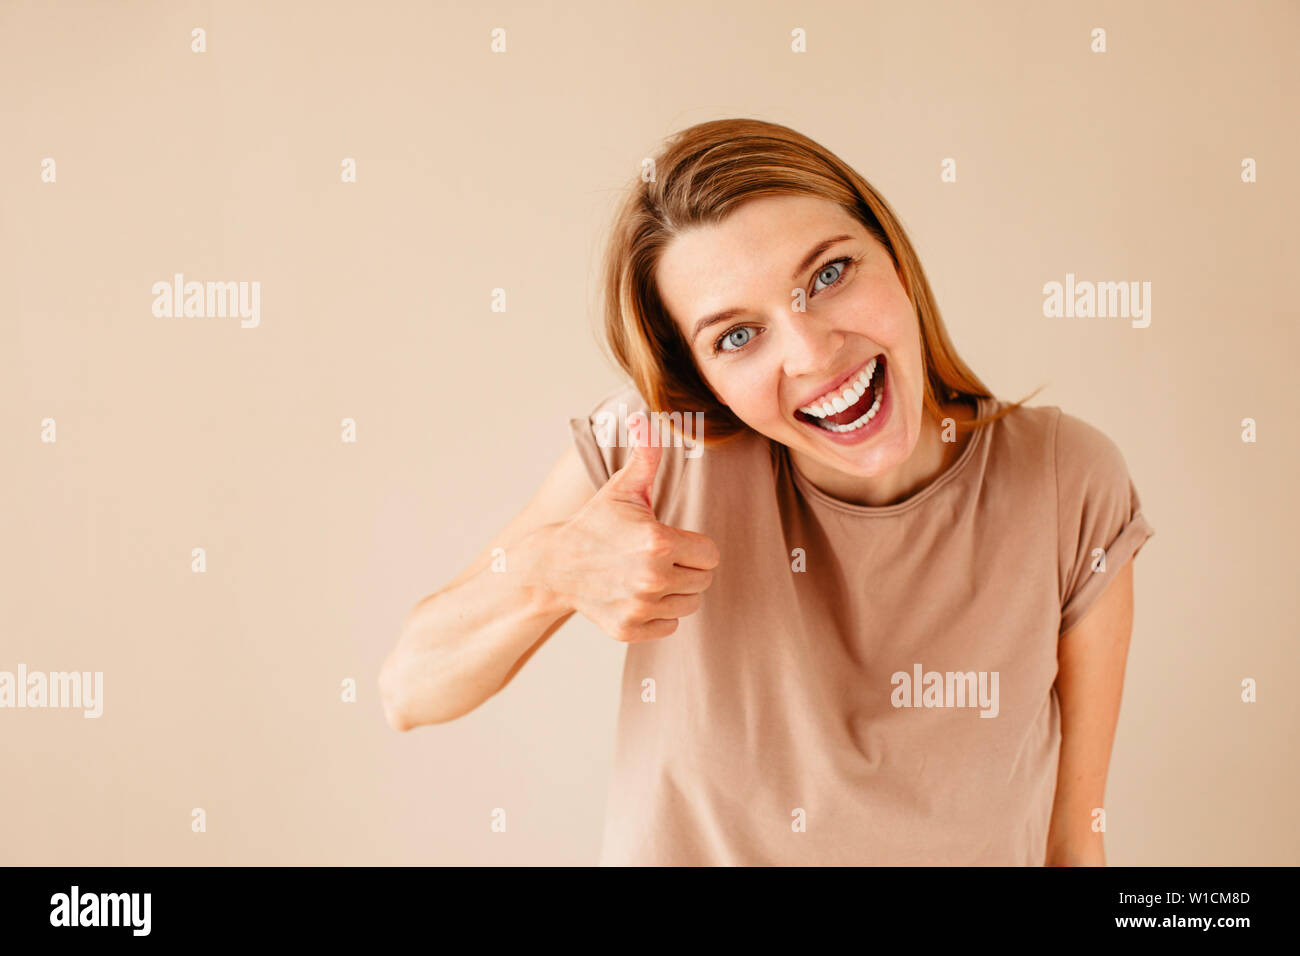 Excited woman gesturing thumb up Banque D'Images